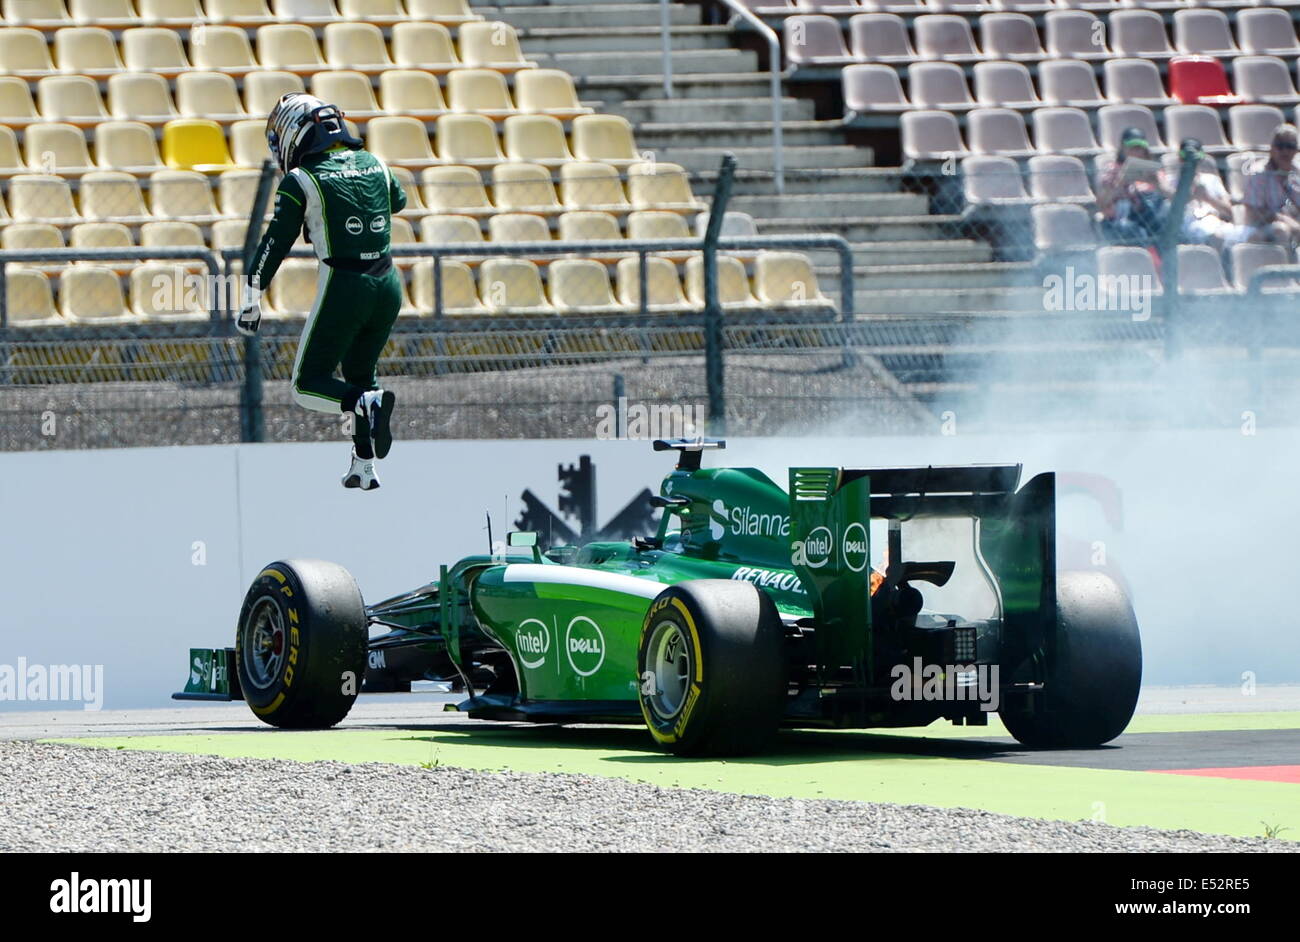 Hockenheim, Germany. 18th July, 2014. Hockenheim, Germany. 18th July, 2014. Japanese Formula One driver Kamui Kobayashi from team Caterham Renault jumps out of his smoking car during the second free practice session at the Hockenheimring race track in Hockenheim, Germany, 18 July 2014. The Formula One Grand Prix of Germany will take place on 20 July 2014 at the Hockenheimring. Photo: BERND WEISSBROD/dpa/Alamy Live News Stock Photo